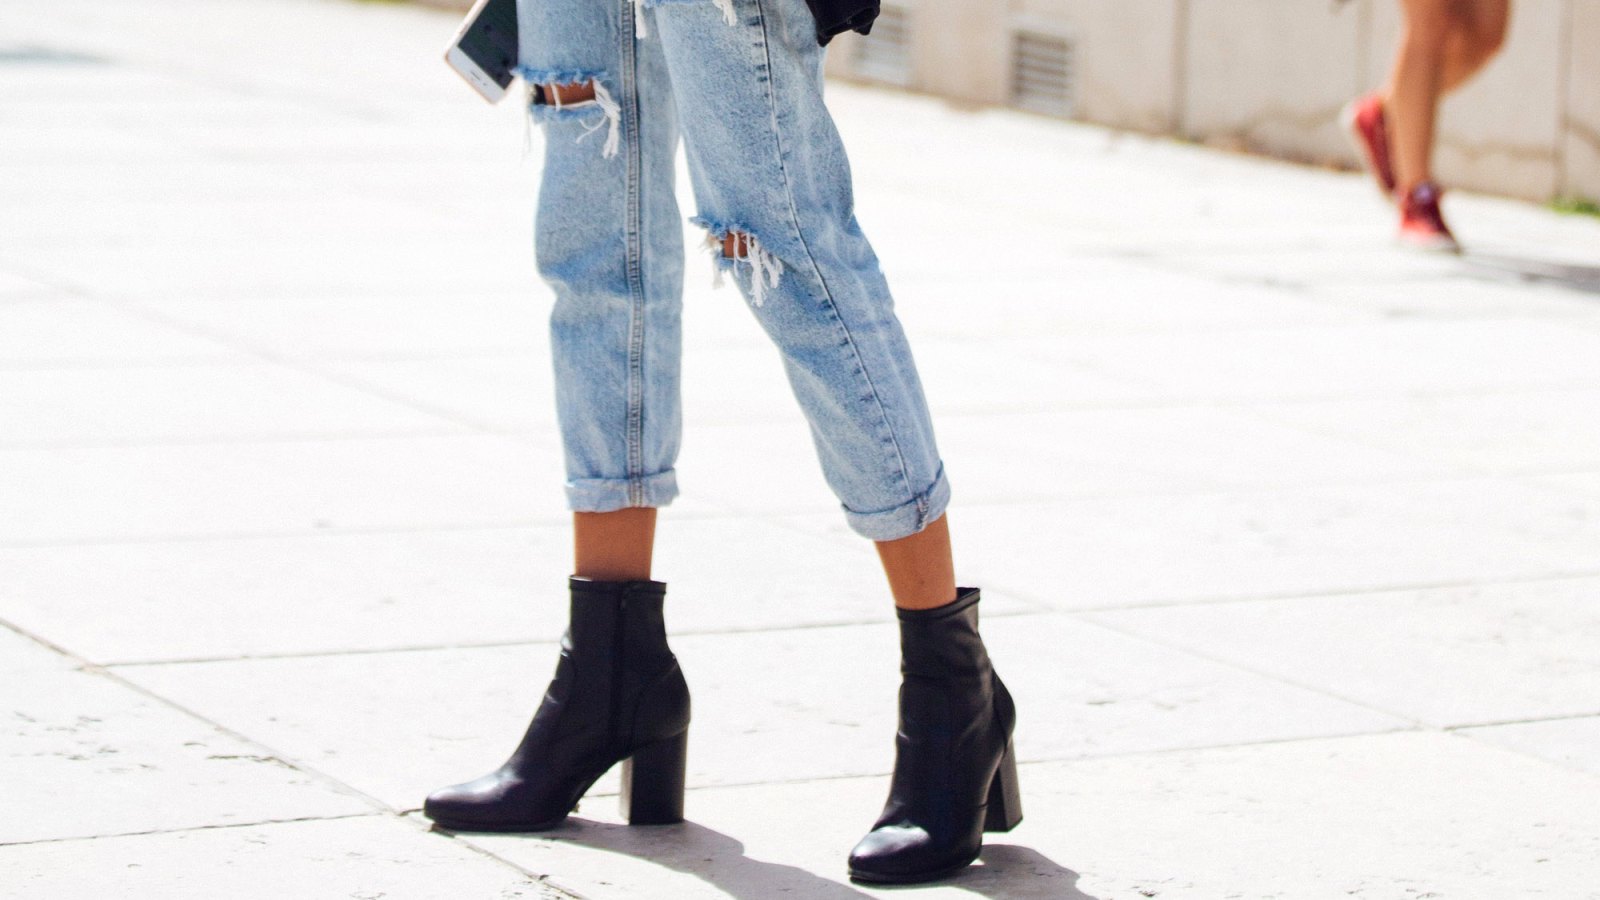 Booties with jeans